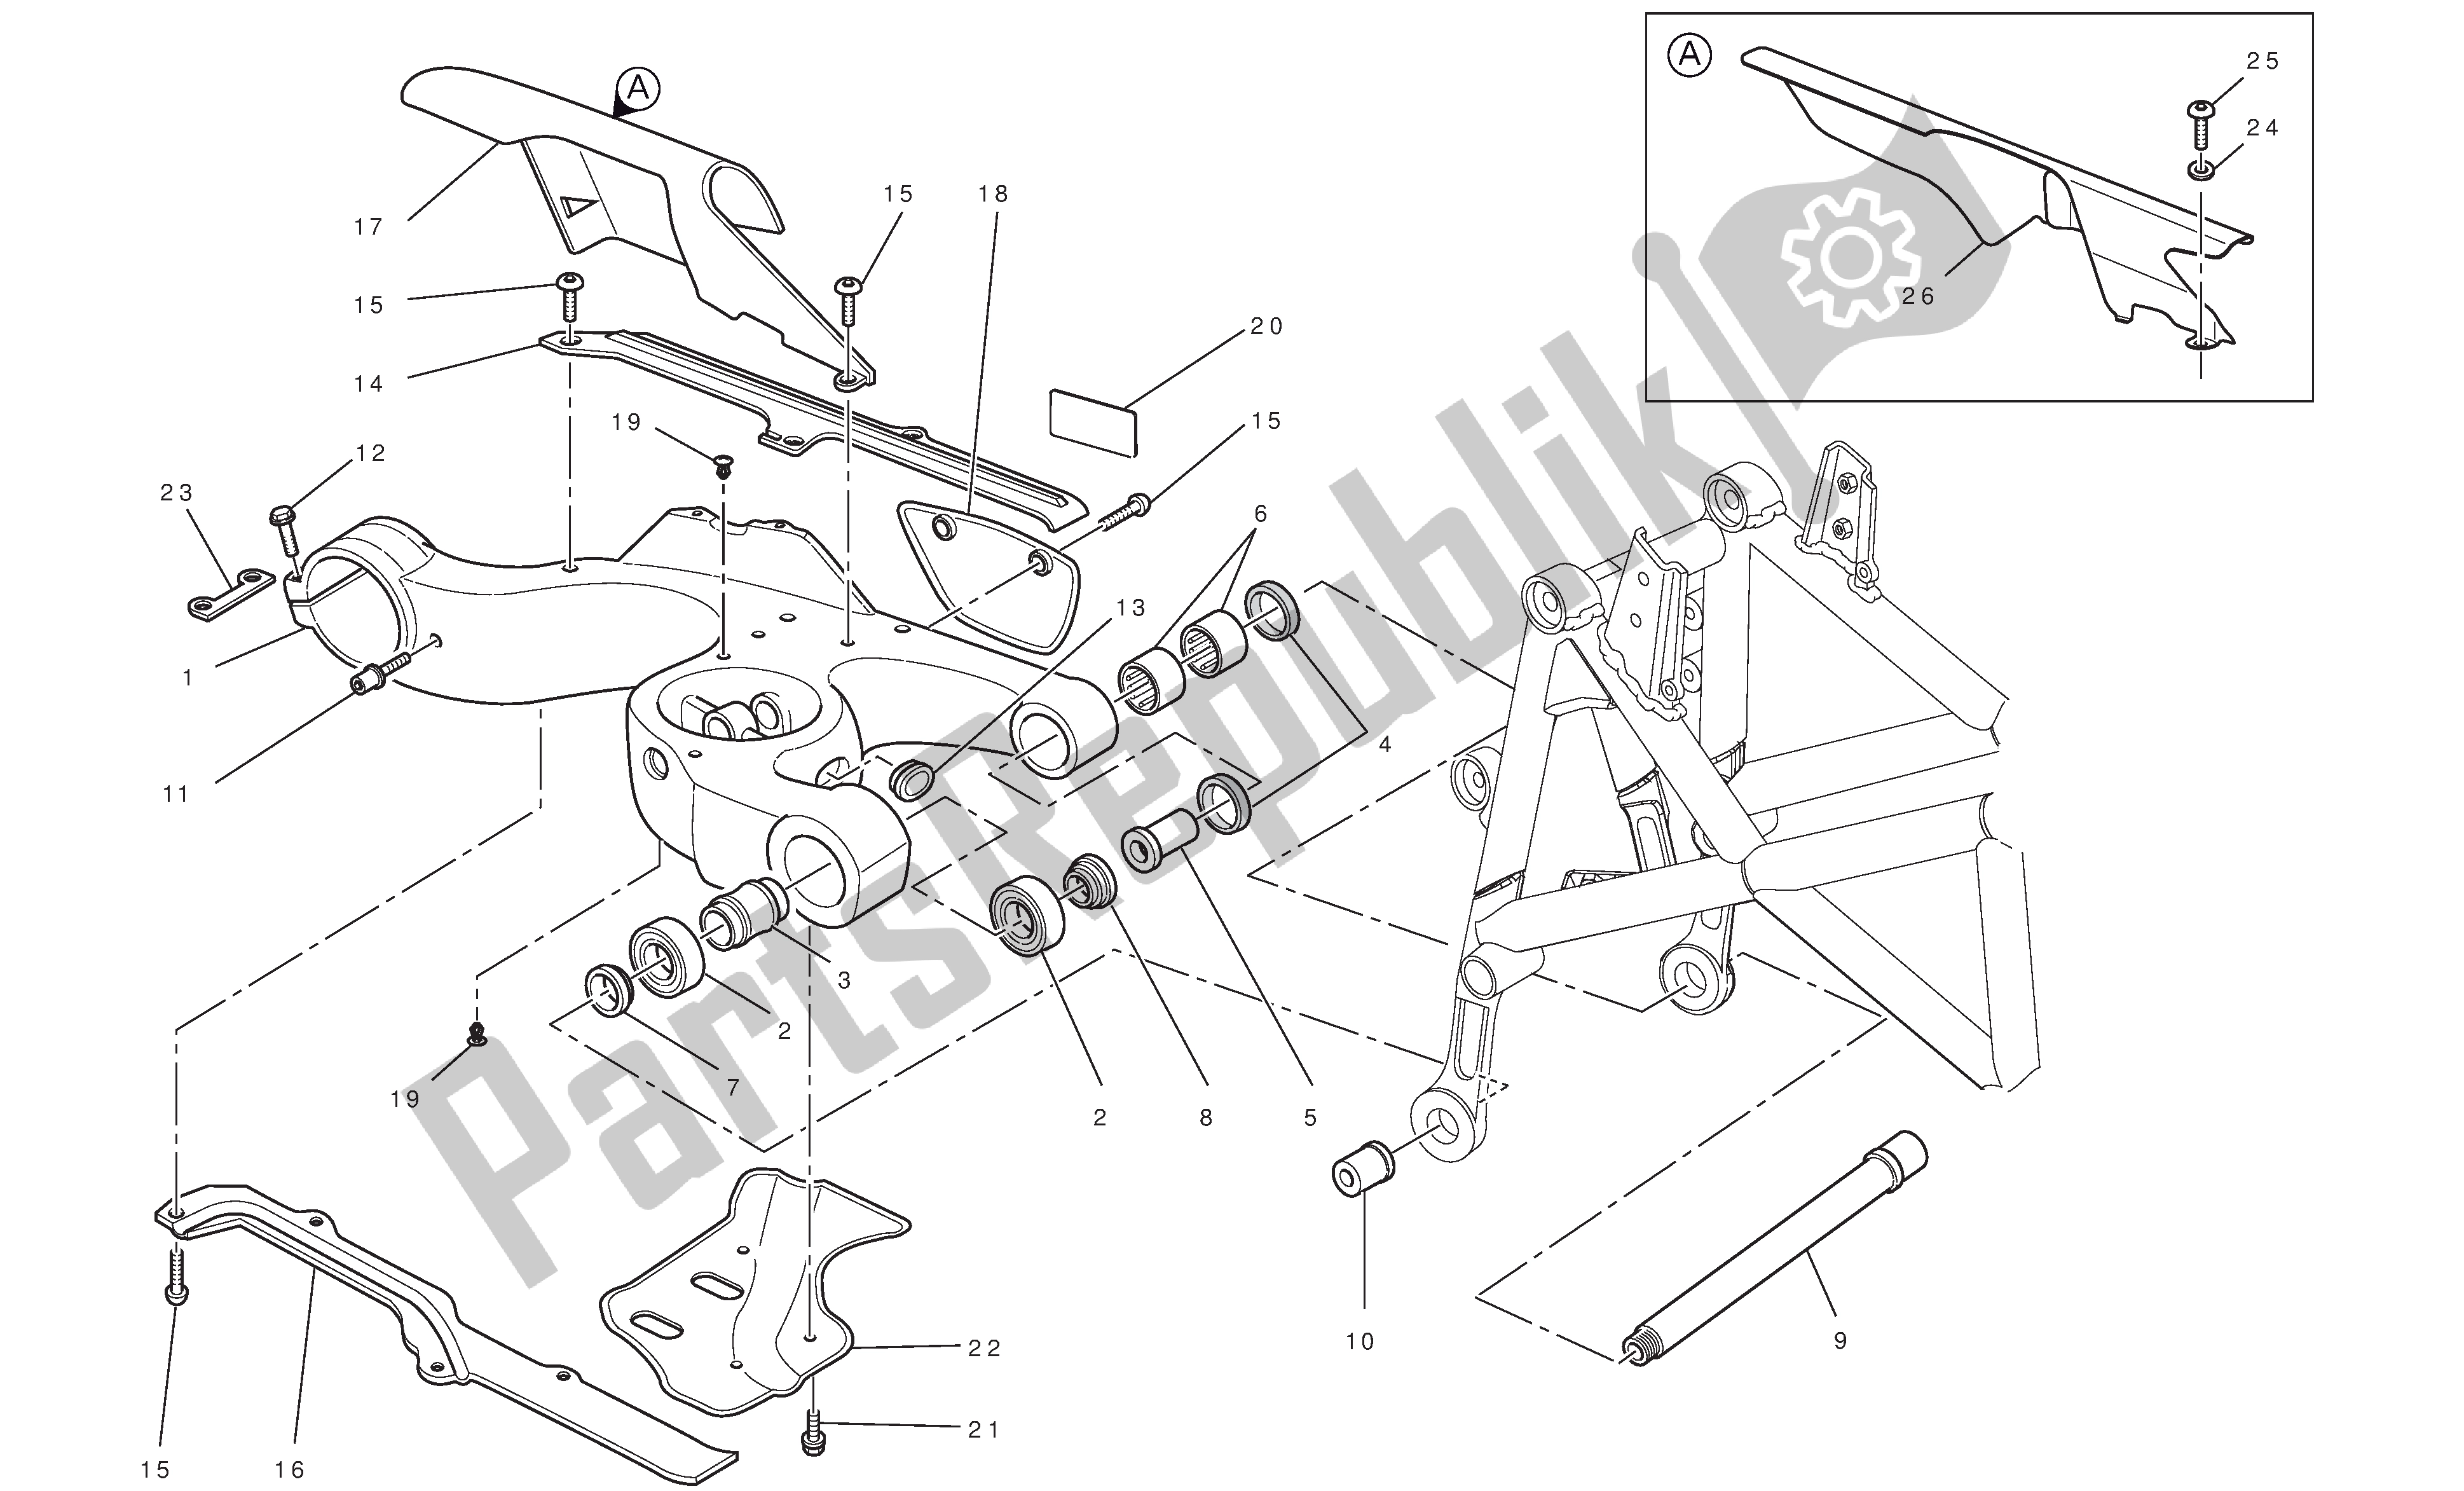 All parts for the Swingarm of the Ducati Hypermotard 796 2010